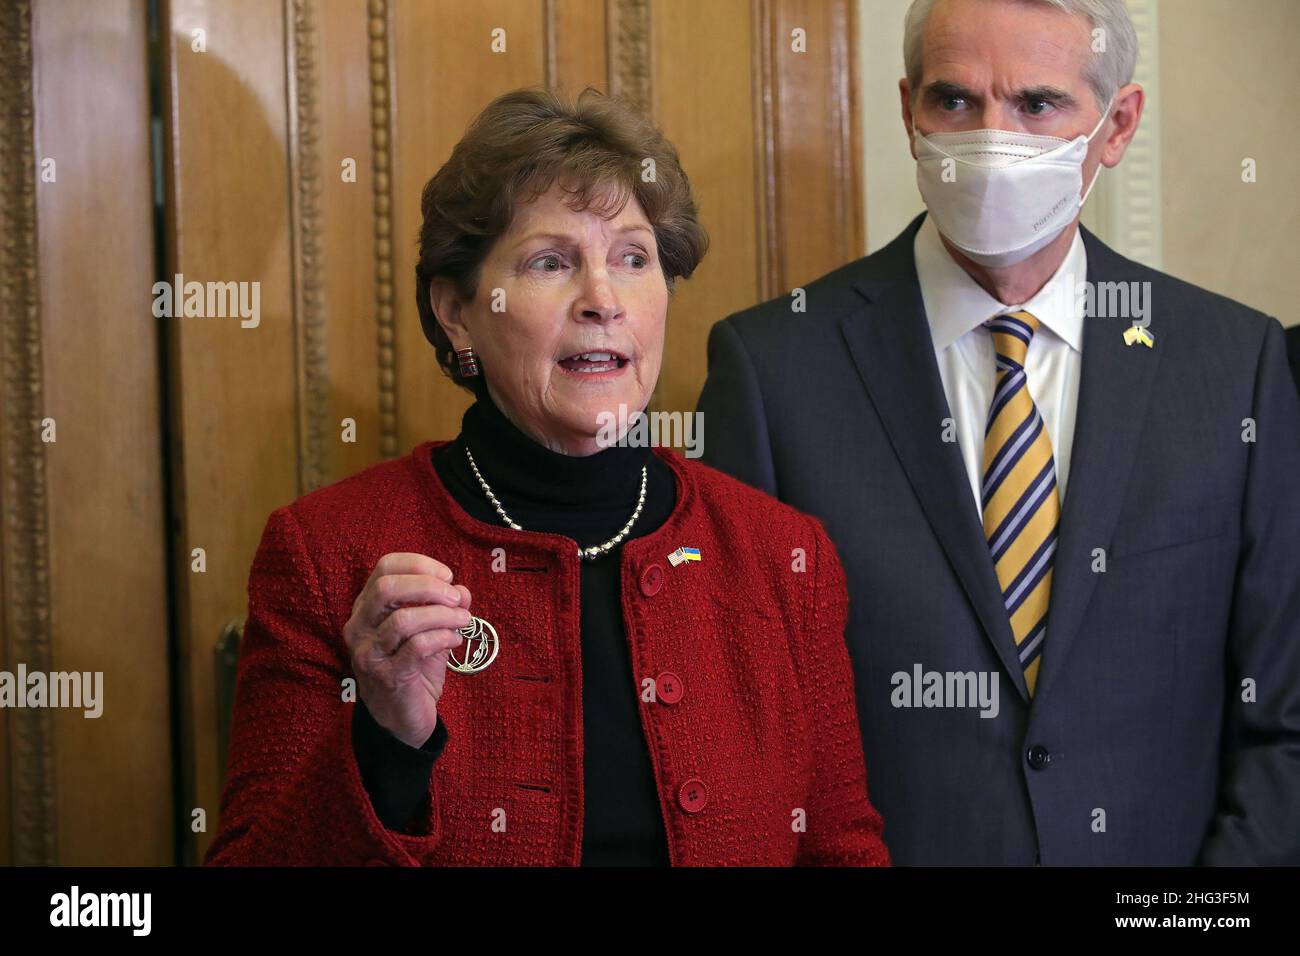 KYIV, UKRAINE - JANUARY 17, 2022 - US Senator Jeanne Shaheen attends a briefing of the bipartisan delegation of the US Congress on a visit to Ukraine, Stock Photo